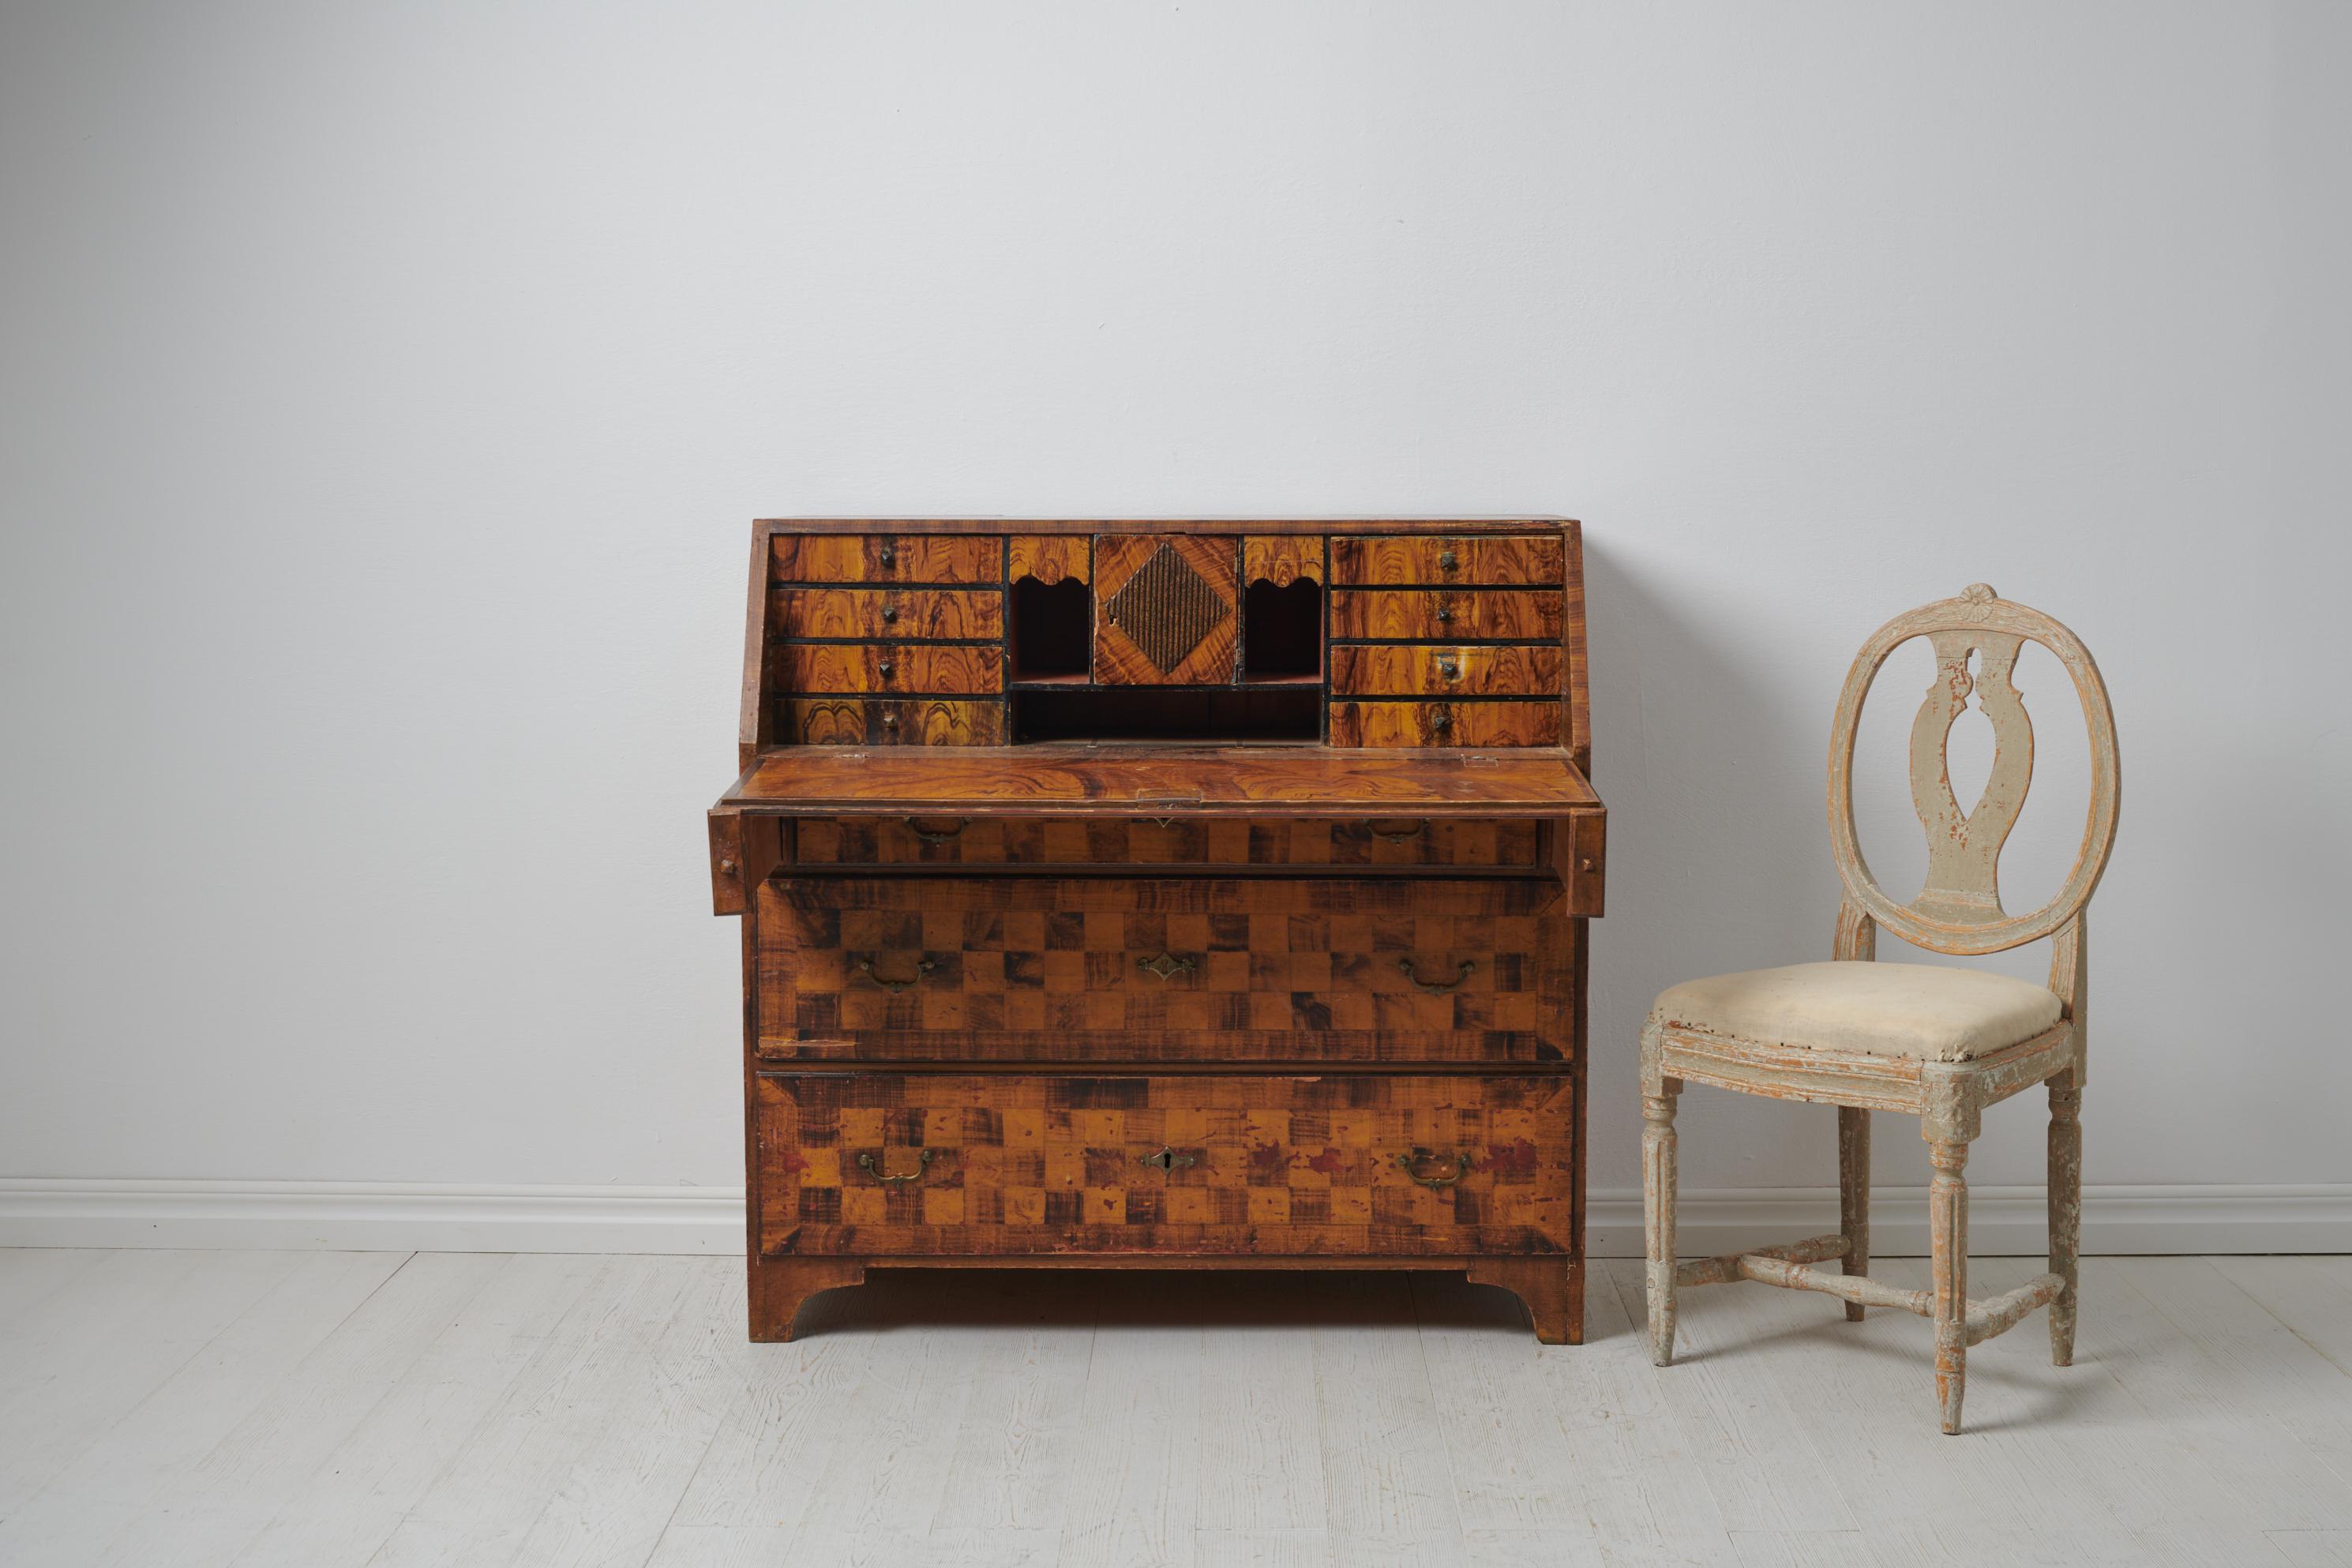 Genuine antique writing bureau from northern Sweden. The bureau is Swedish and made in painted pine during the early 1800s, around 1810. It has a very unusual paint which is the artist’s free interpretation of walnut wood. The bureau was painted